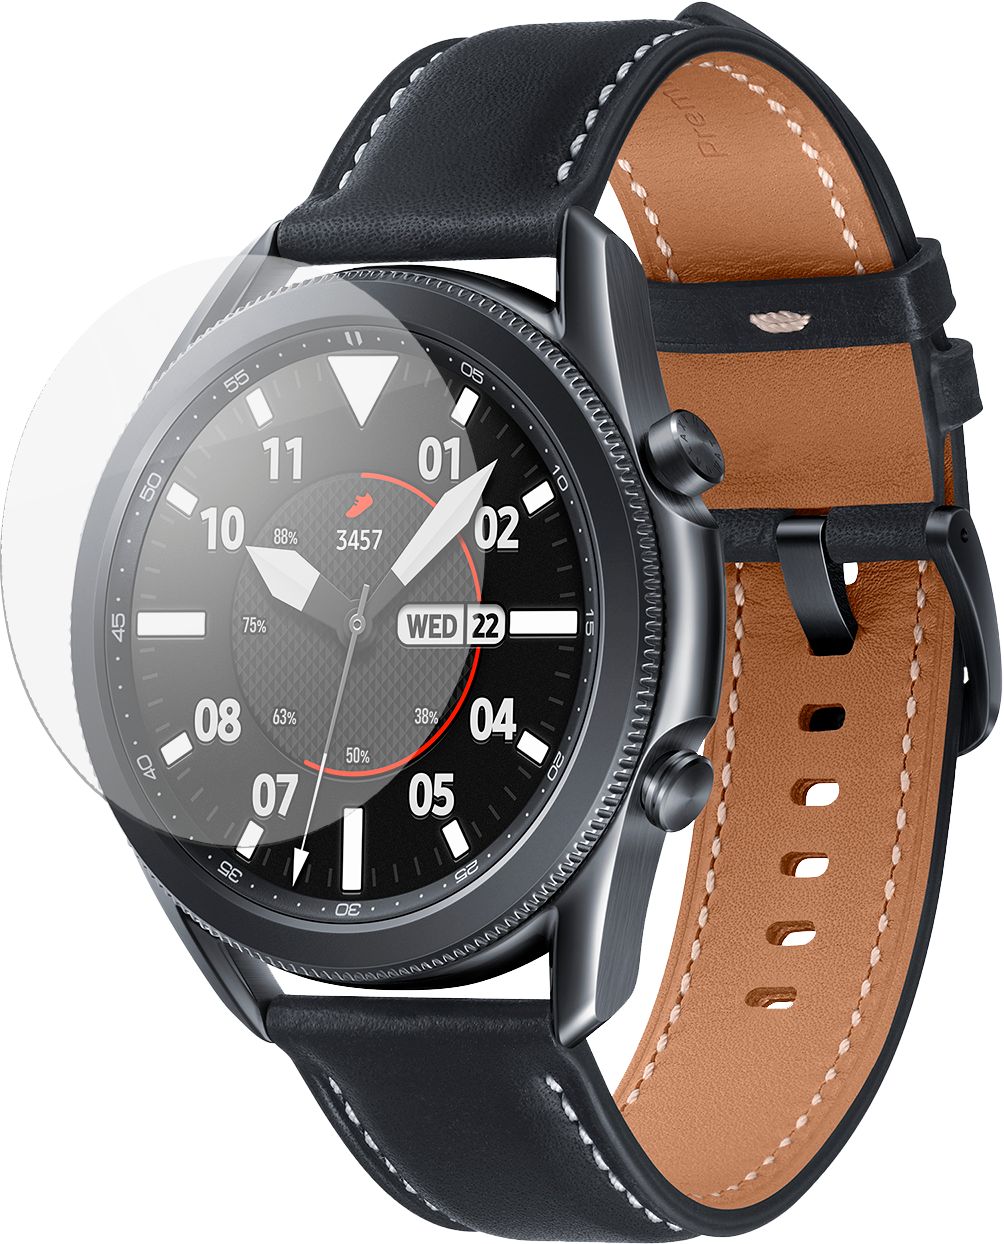 Angle View: ZAGG - InvisibleShield GlassFusion+ Flexible Hybrid Screen Protector for Samsung Galaxy Watch3 41mm